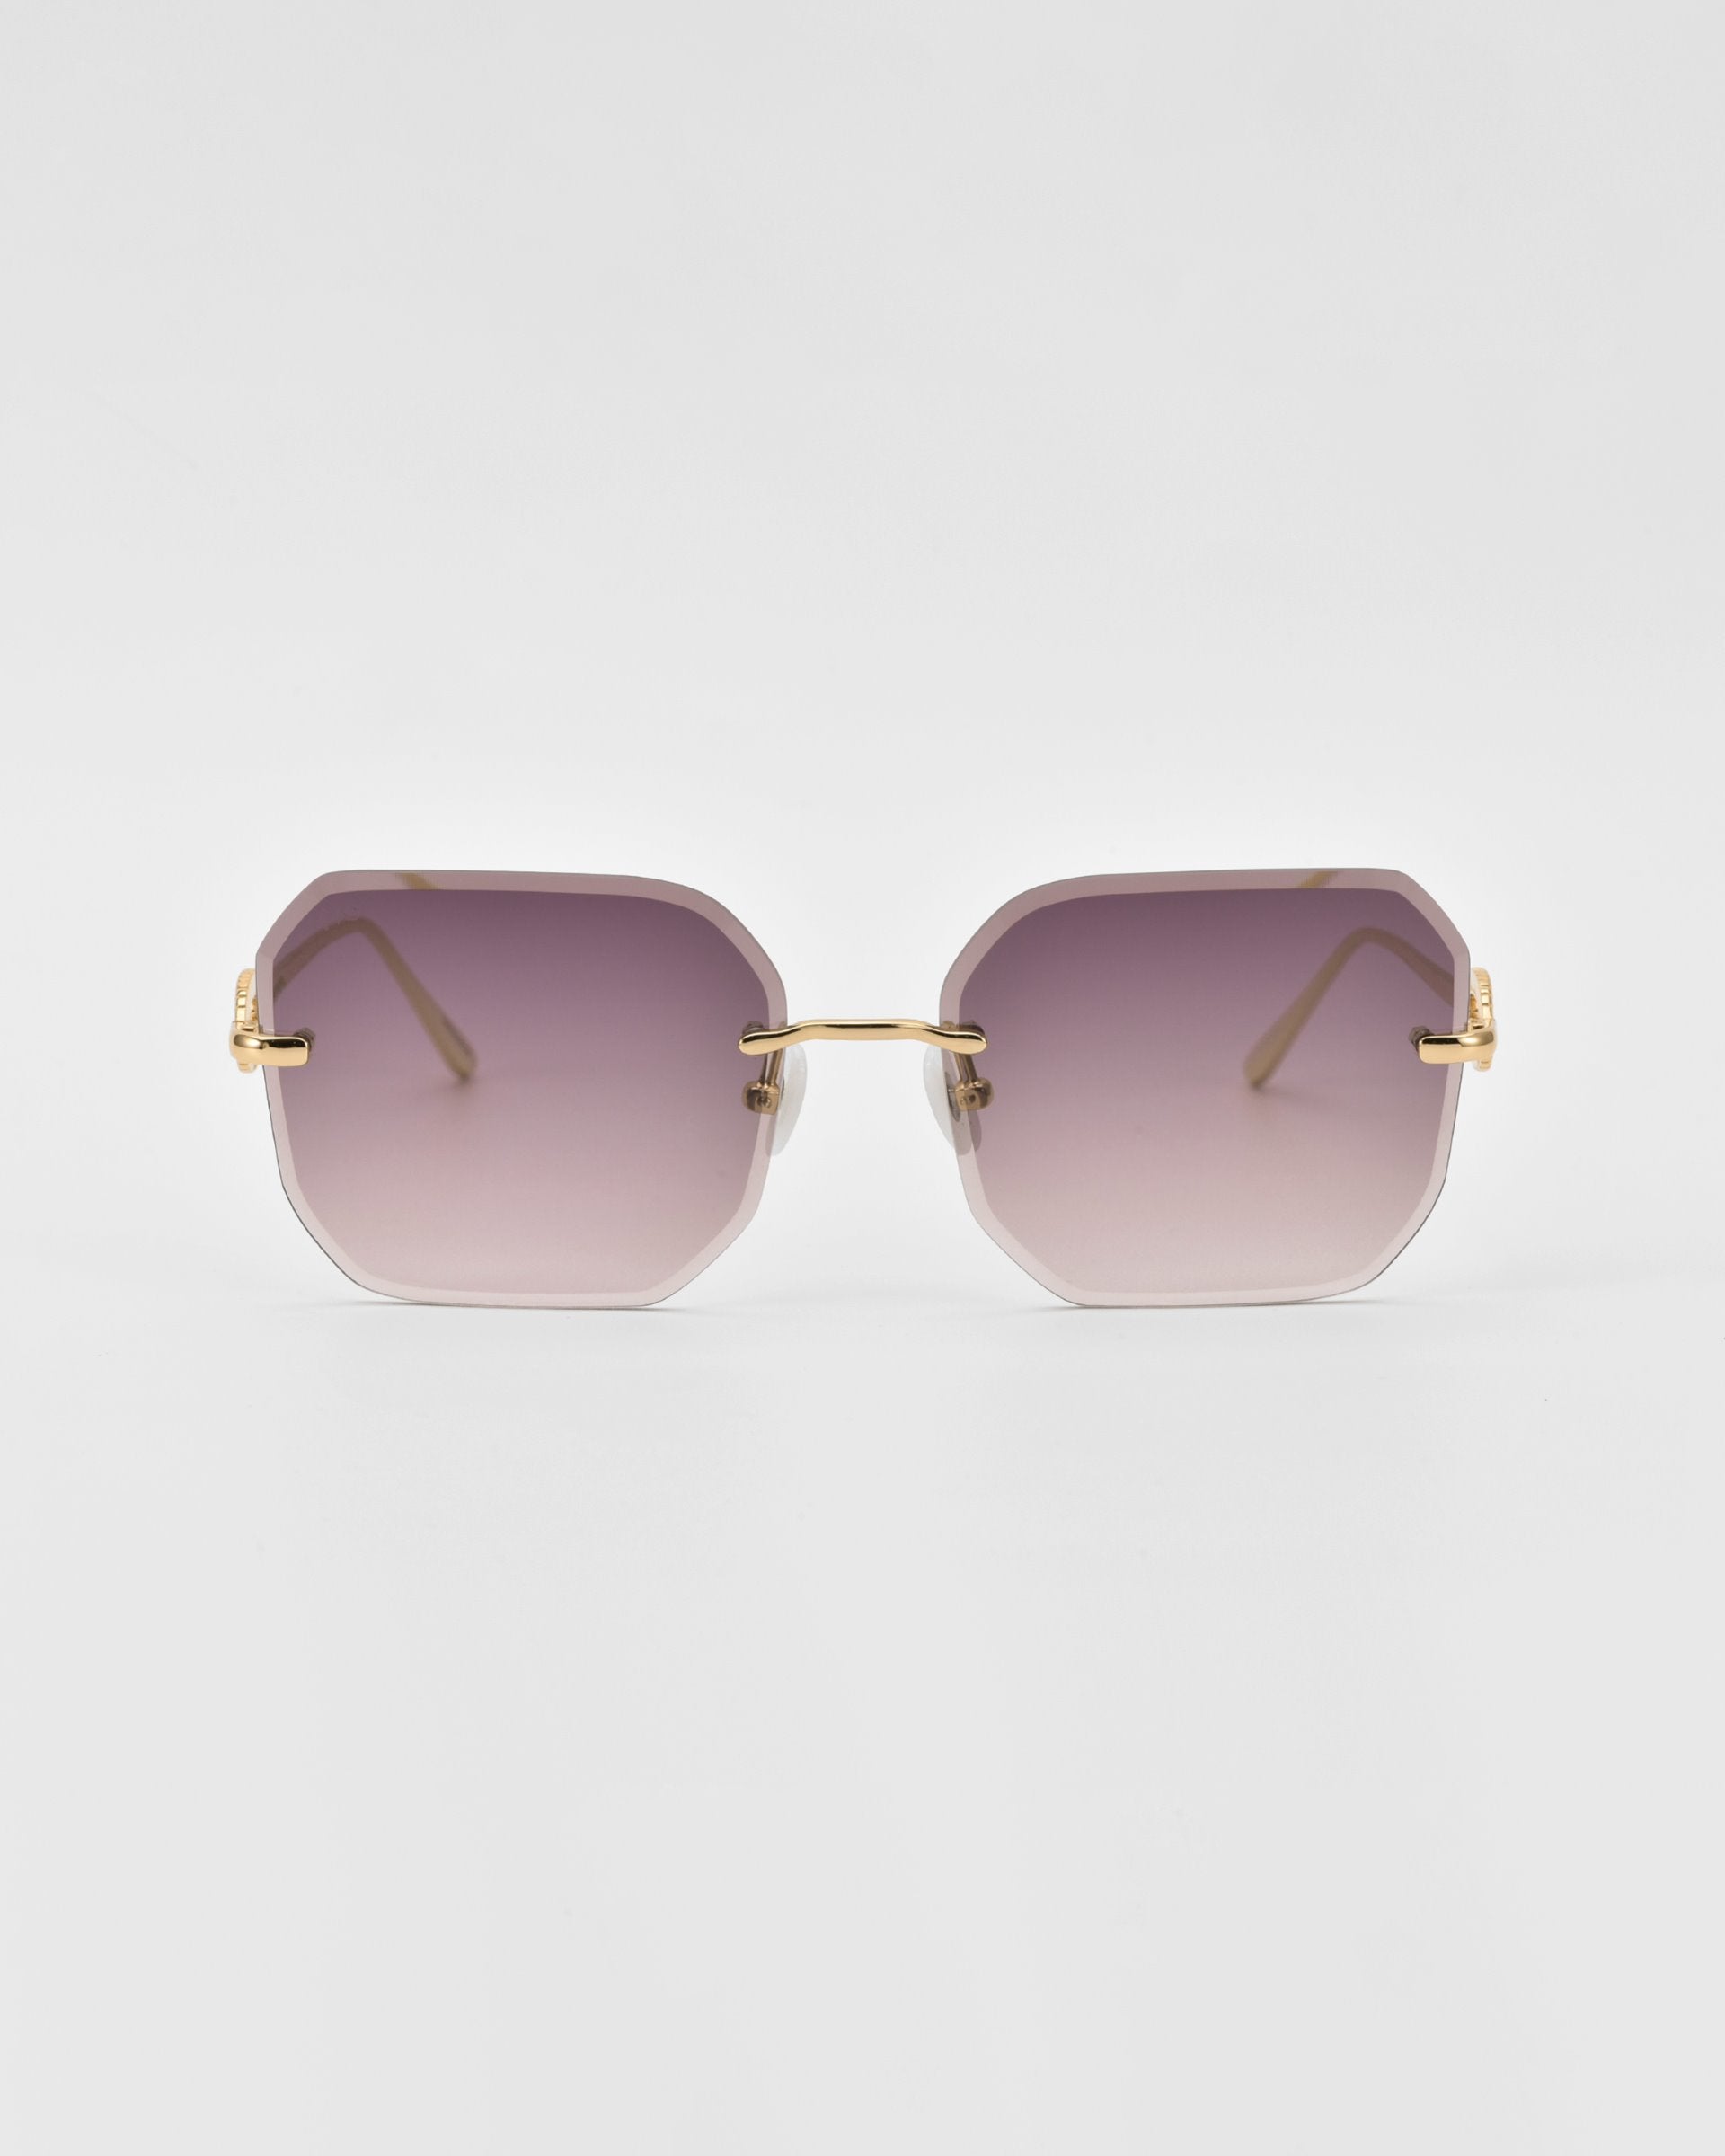 Introducing the For Art's Sake® Aria sunglasses, a pair of stylish, rimless shades with purple gradient lenses and gold temples. The design features geometric, slightly rounded square lenses and jade-stone nose pads for added comfort.